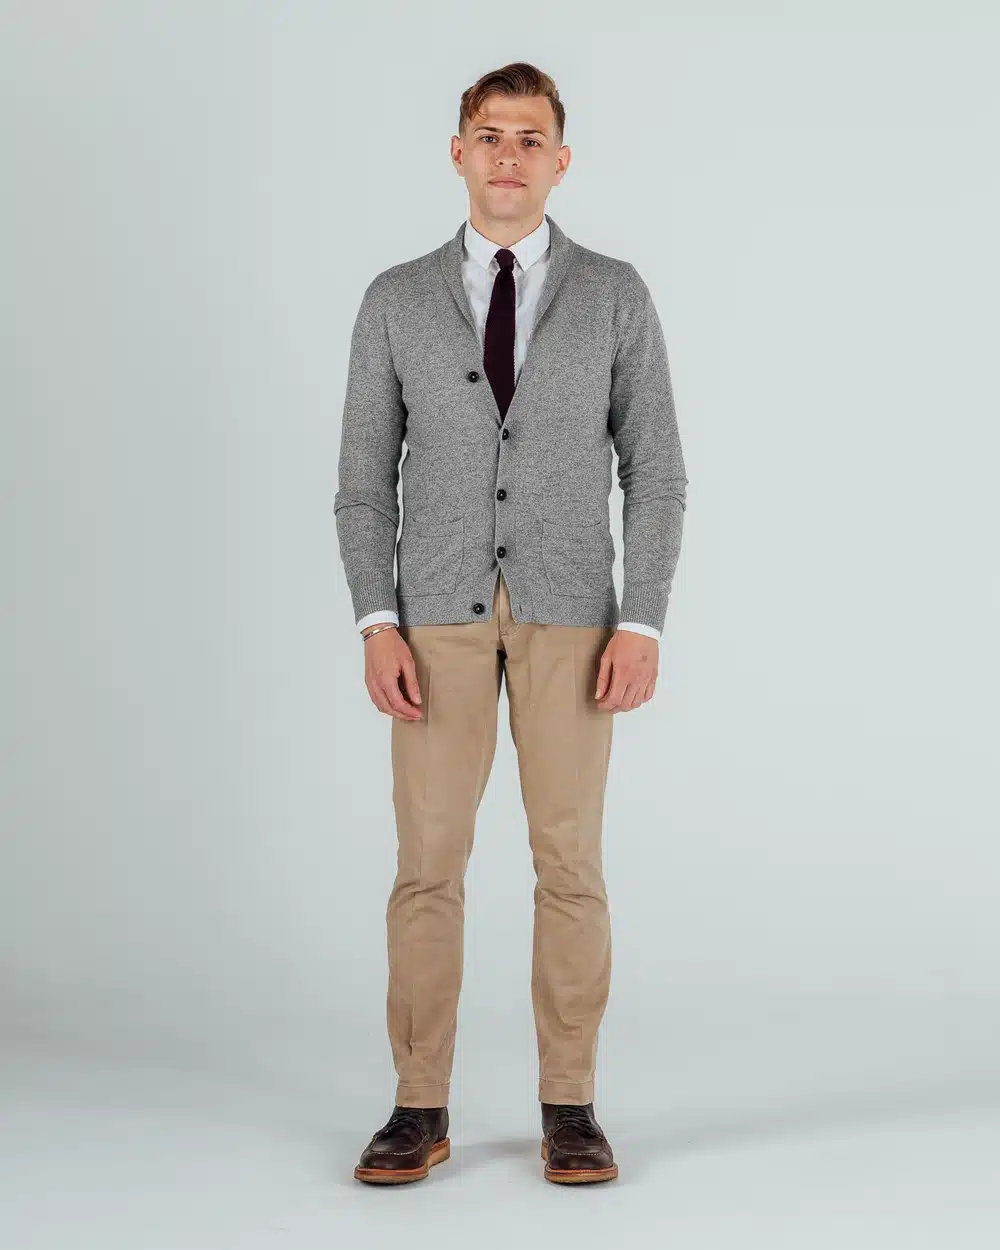 Cardigan Over Shirt and Tie